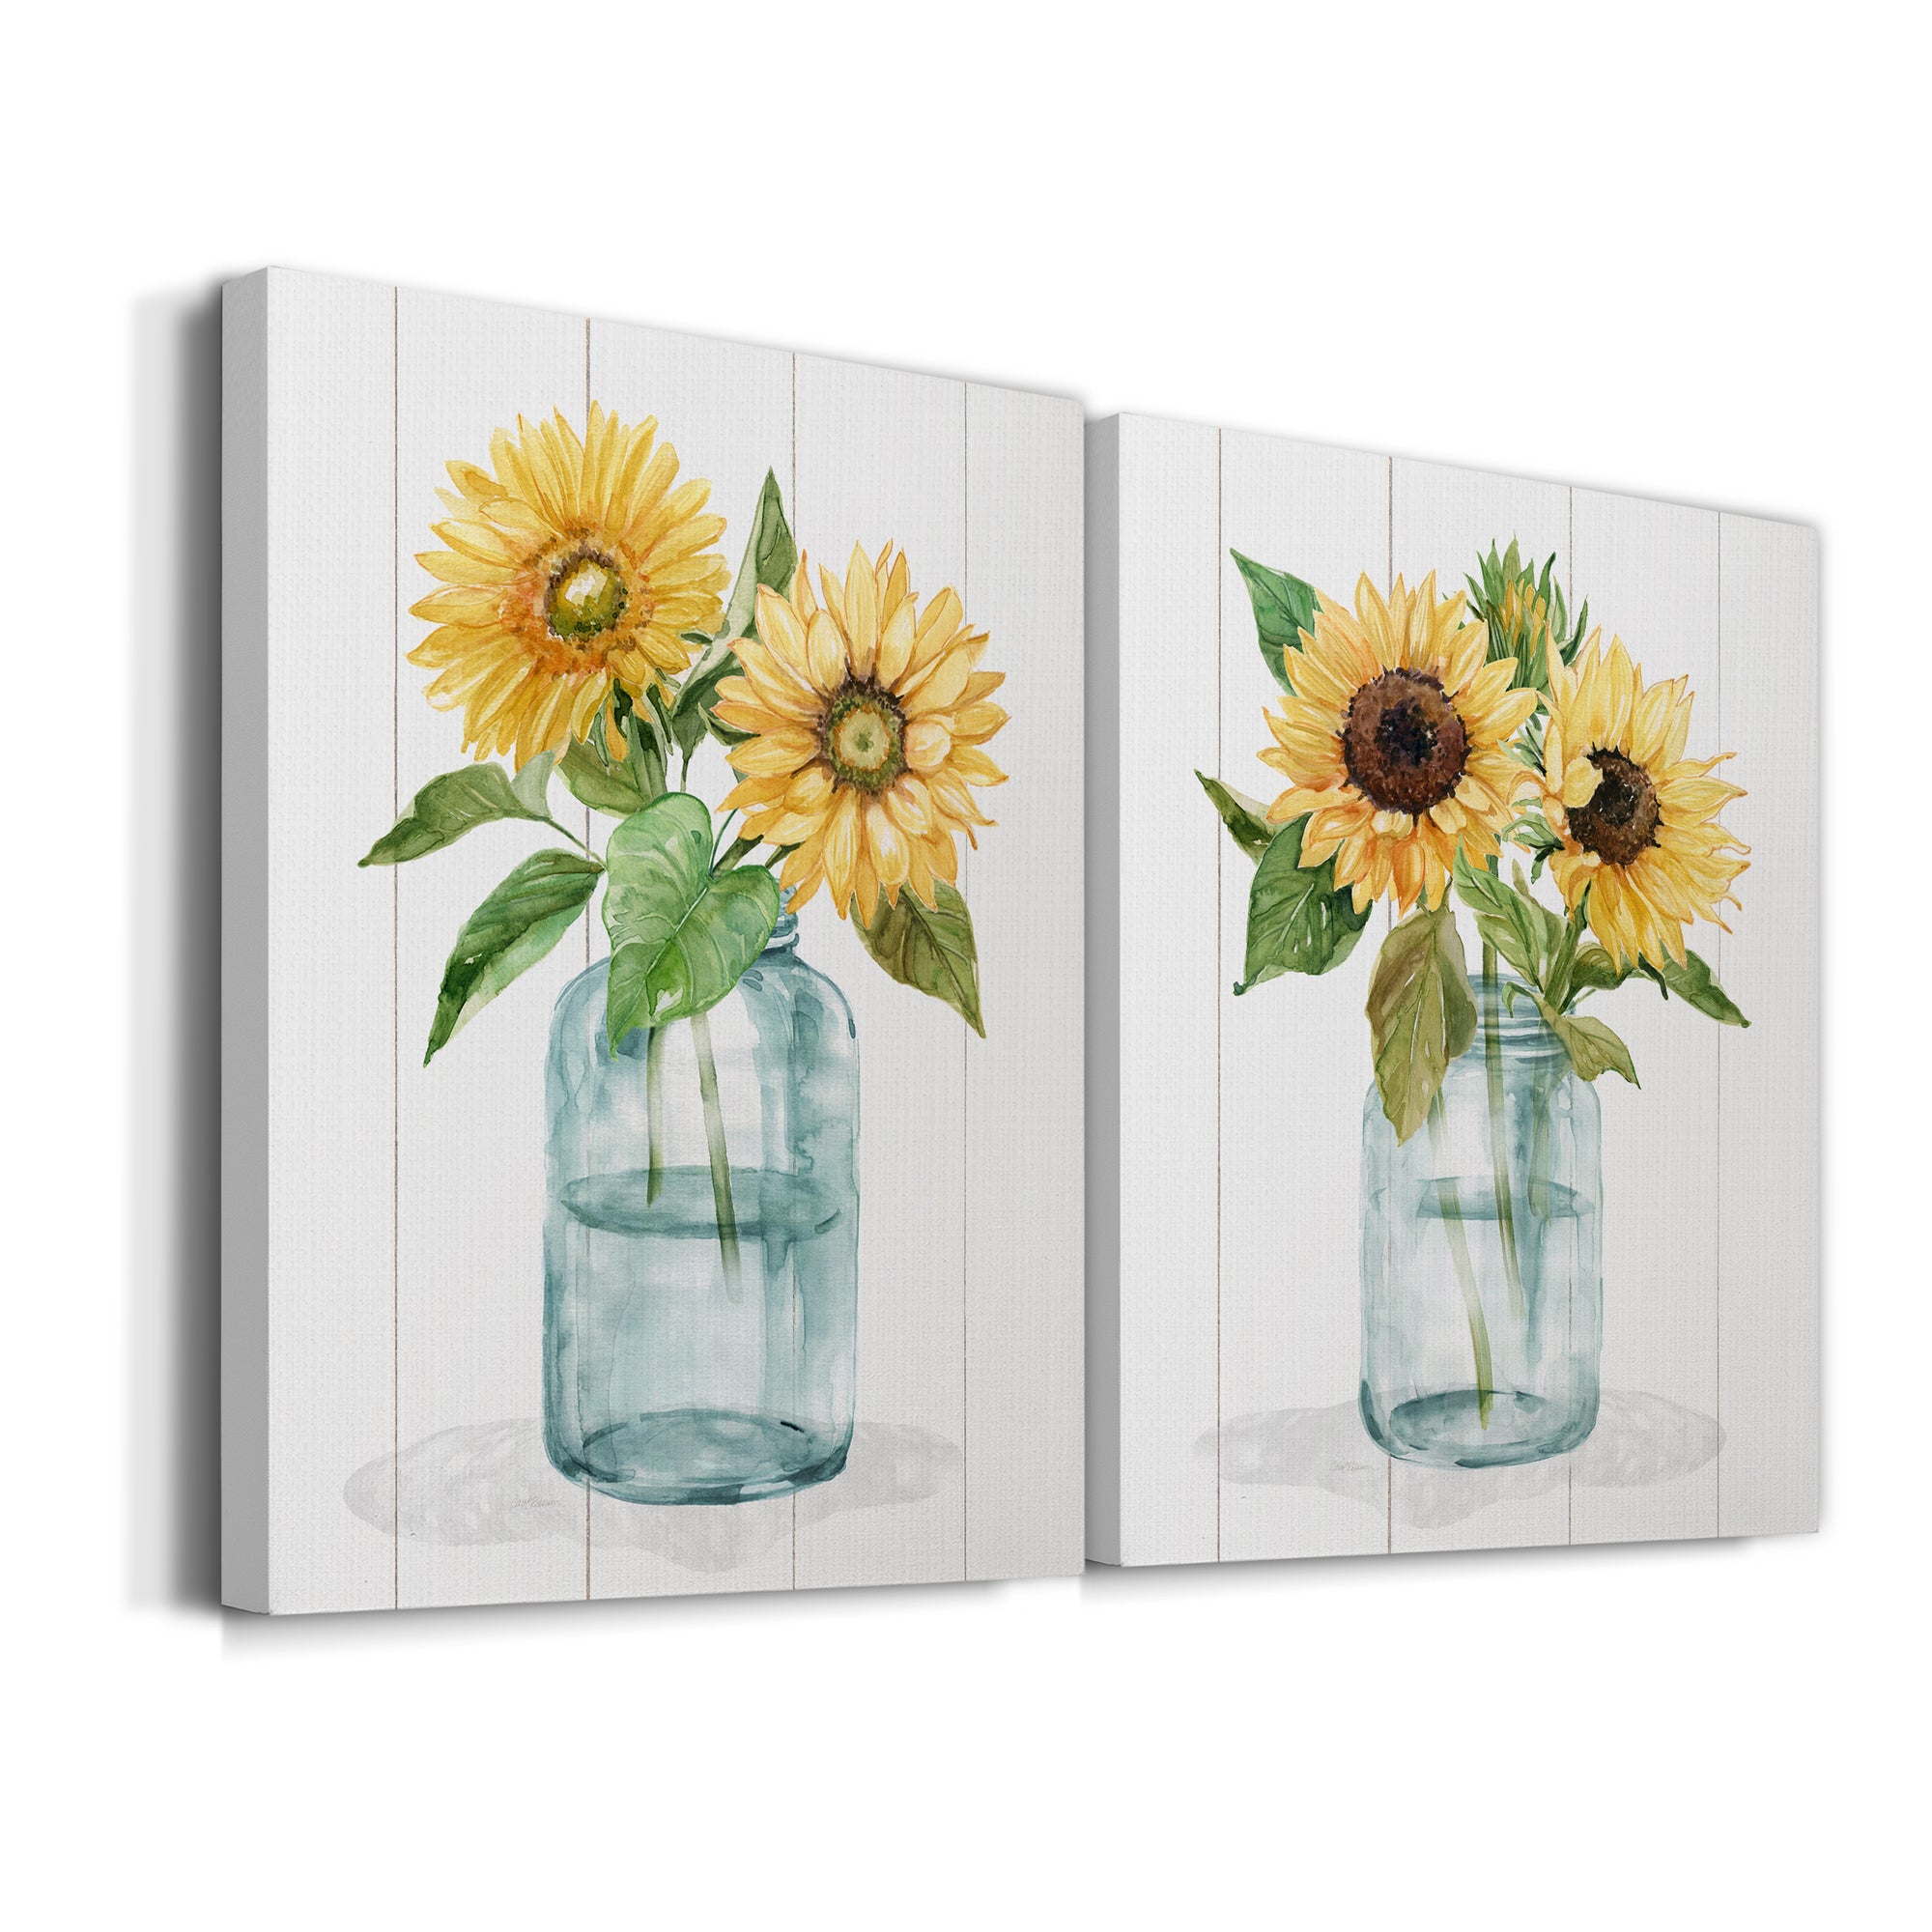 Sunny Day I Premium Gallery Wrapped Canvas - Ready to Hang - Set of 2 - 8 x 12 Each